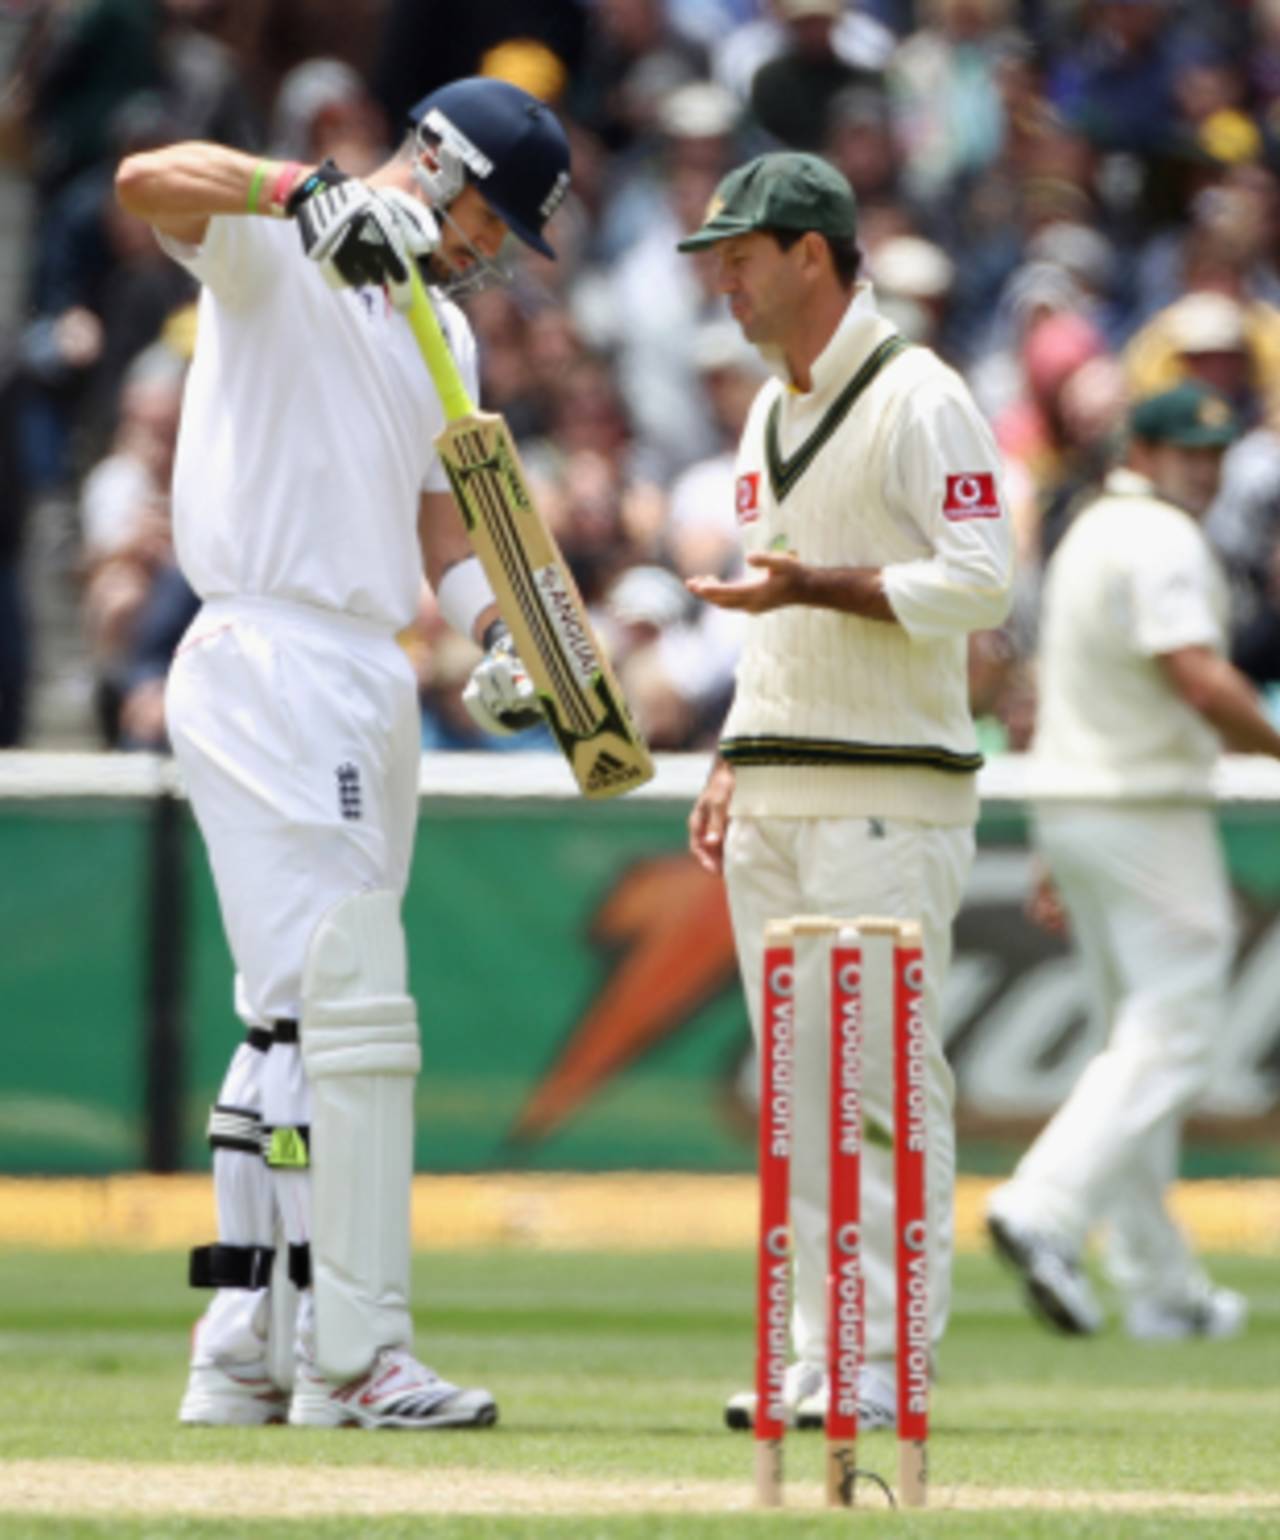 Kevin Pietersen gestures at his bat after a disputed review decision, Australia v England, 4th Test, Melbourne, 2nd day, December 27, 2010 